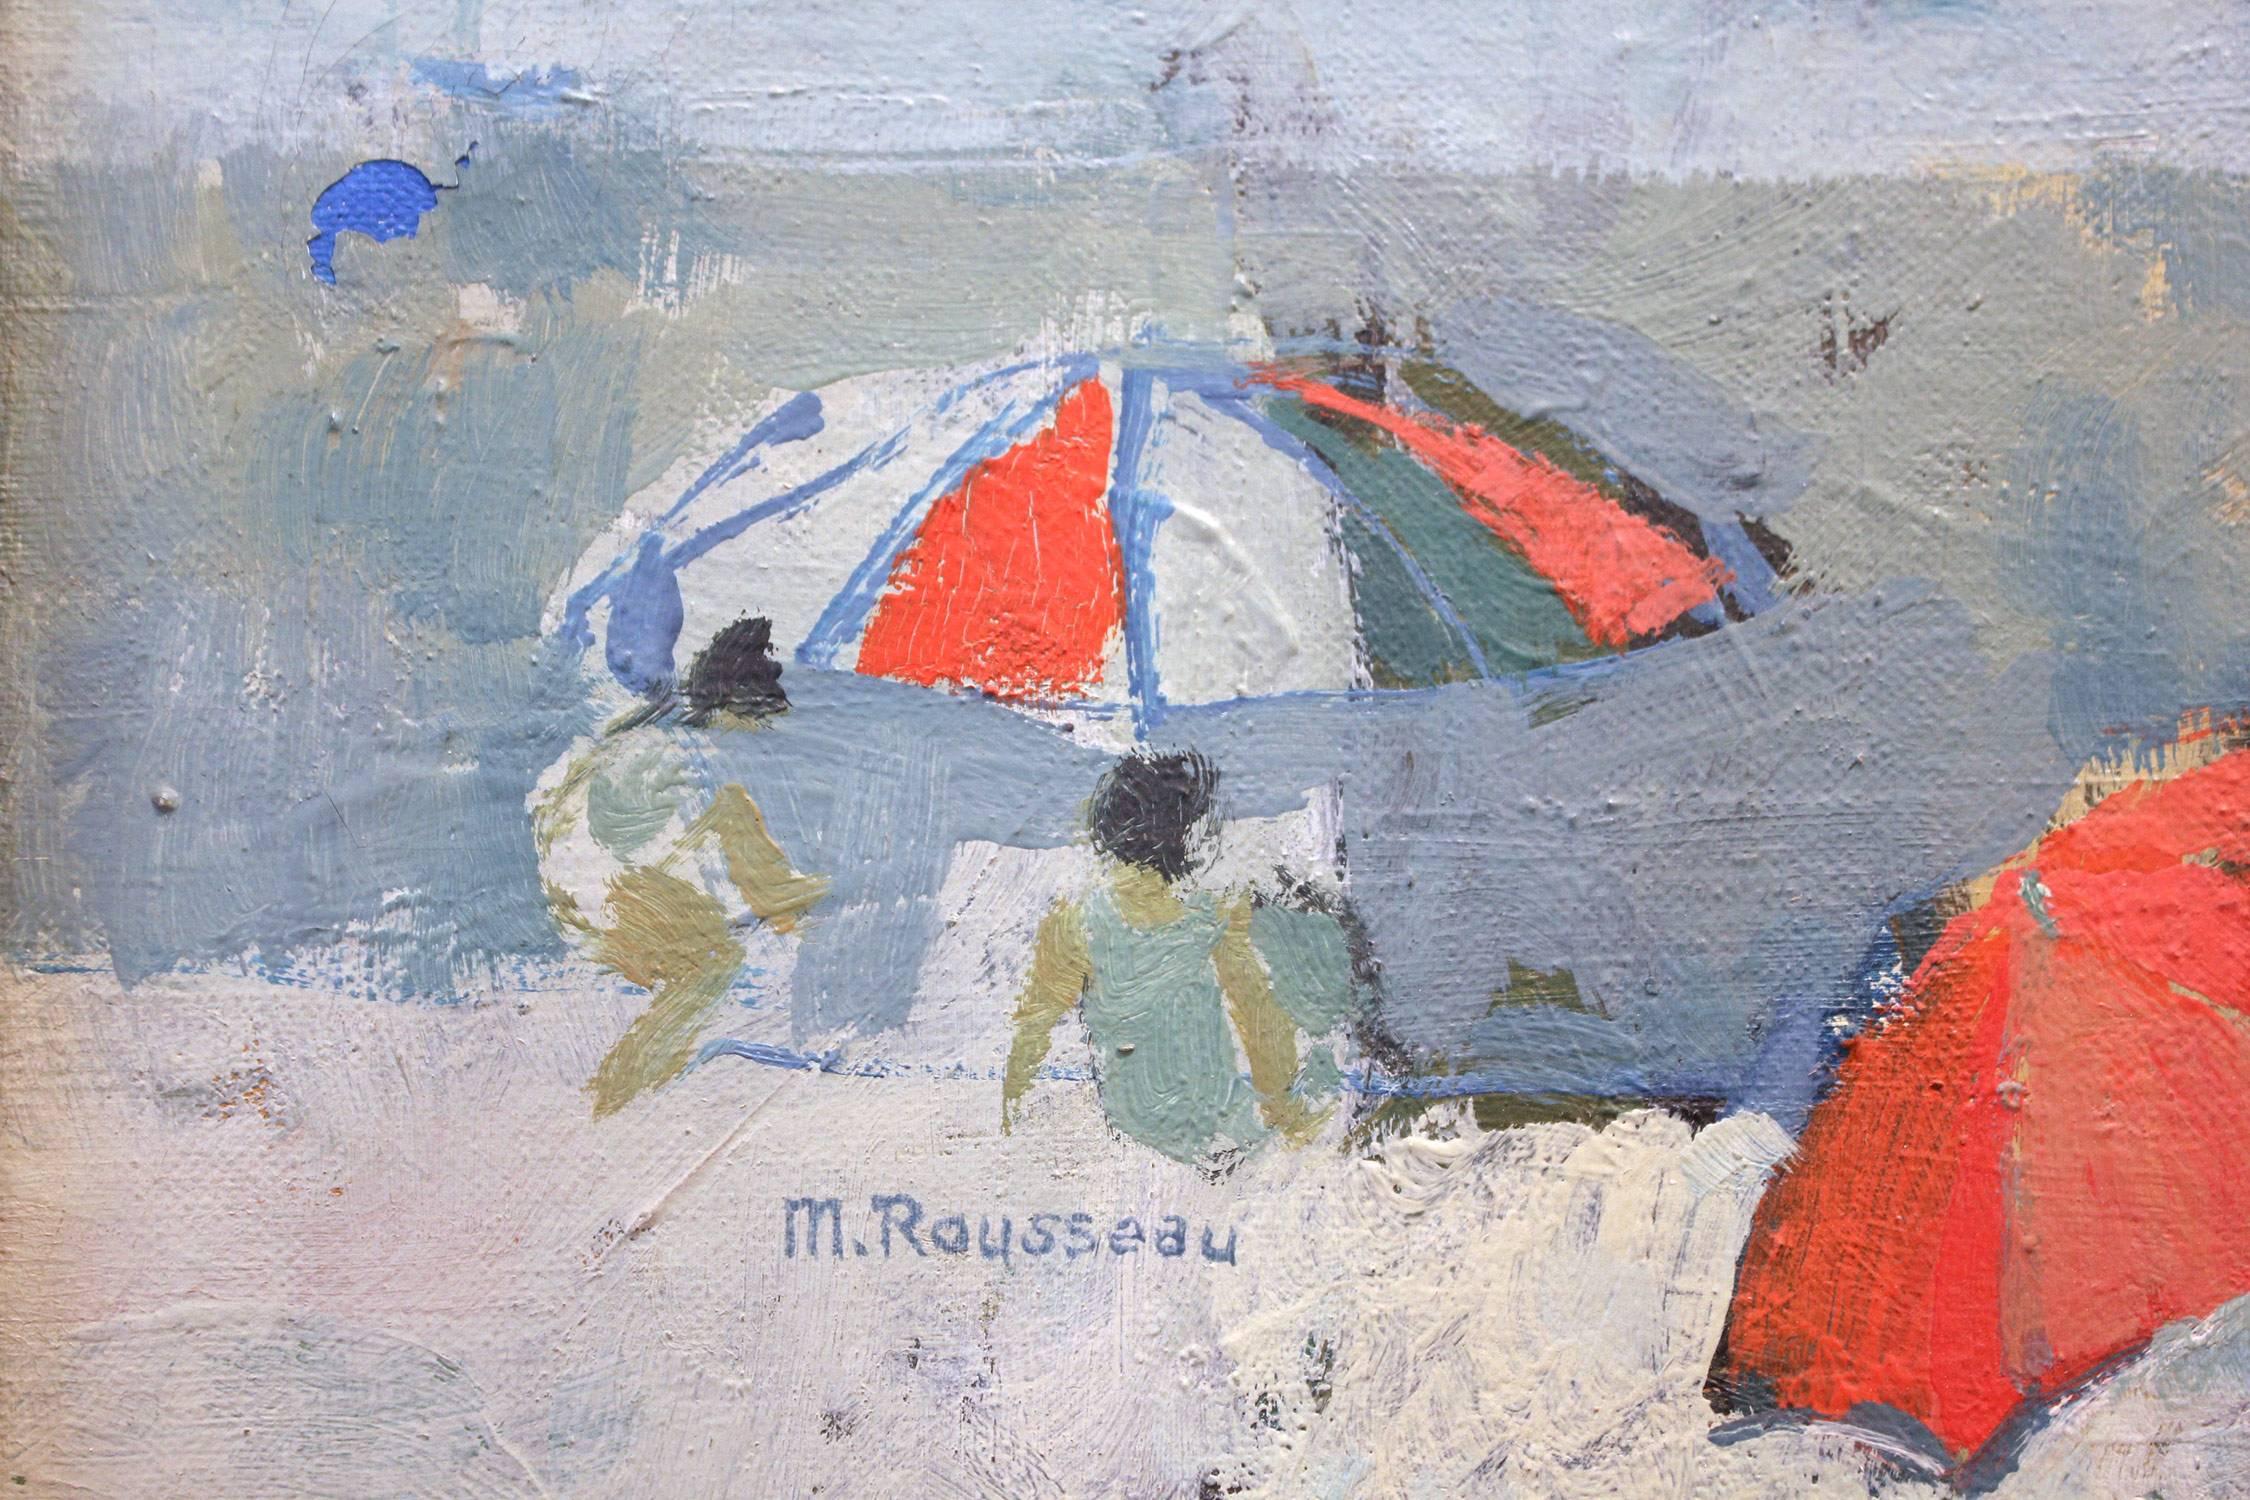 Afternoon at the Beach - Impressionist Painting by Marguerite Rousseau